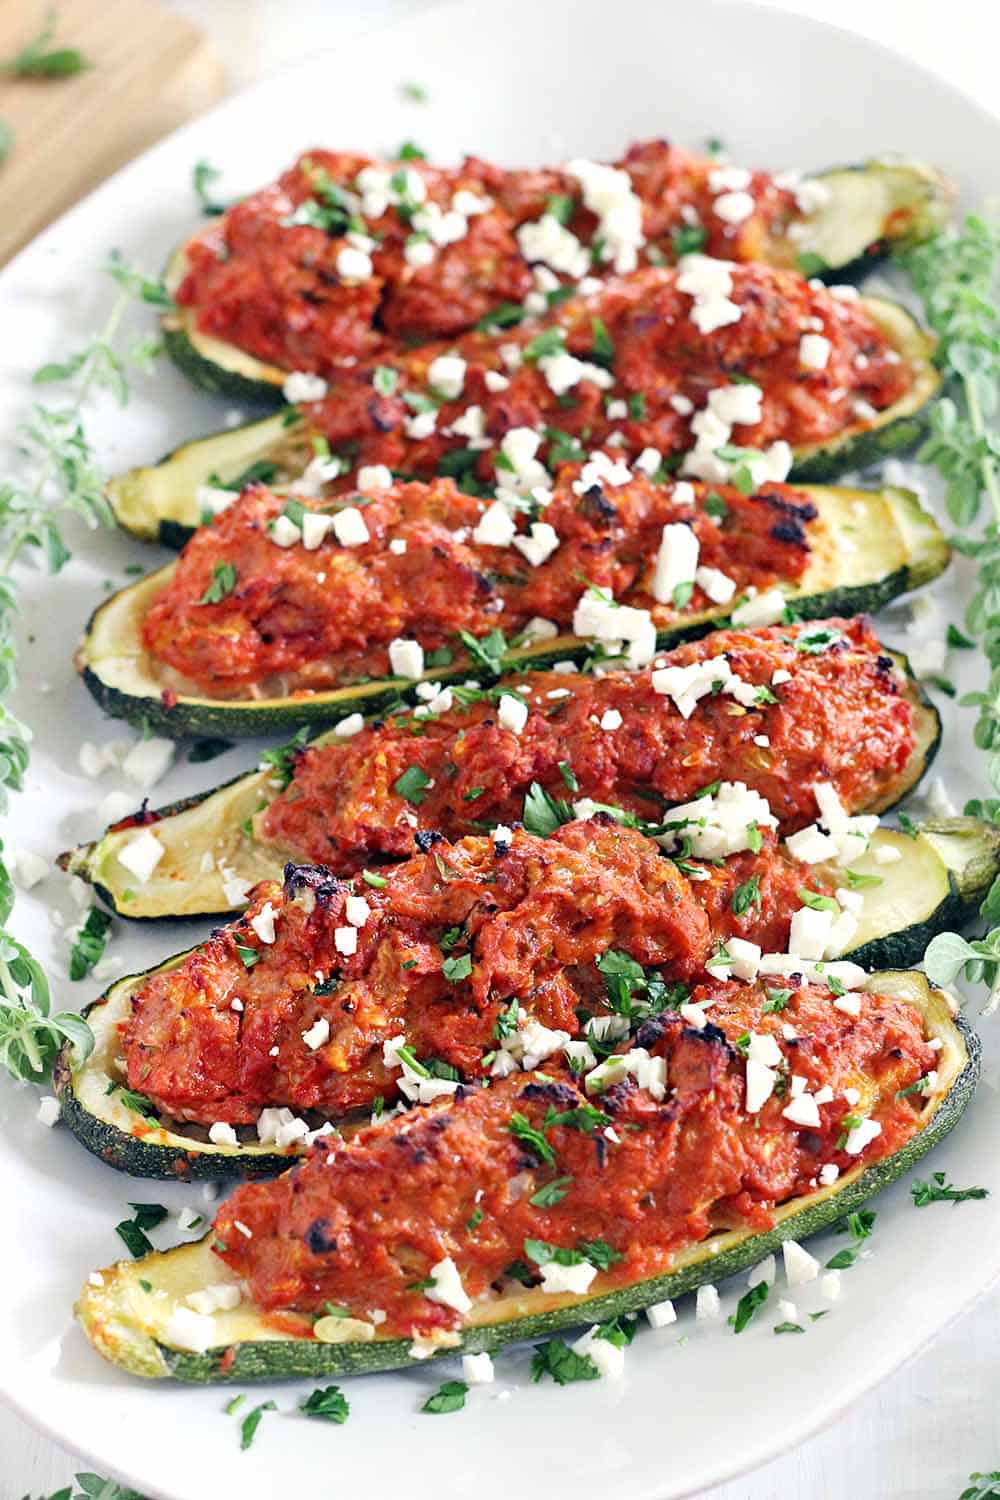 These Paleo Greek Stuffed Zucchini Boats are super healthy and low-carb! Made with lean ground turkey and seasoned with Mediterranean flavors. Only 15 minutes of prep!